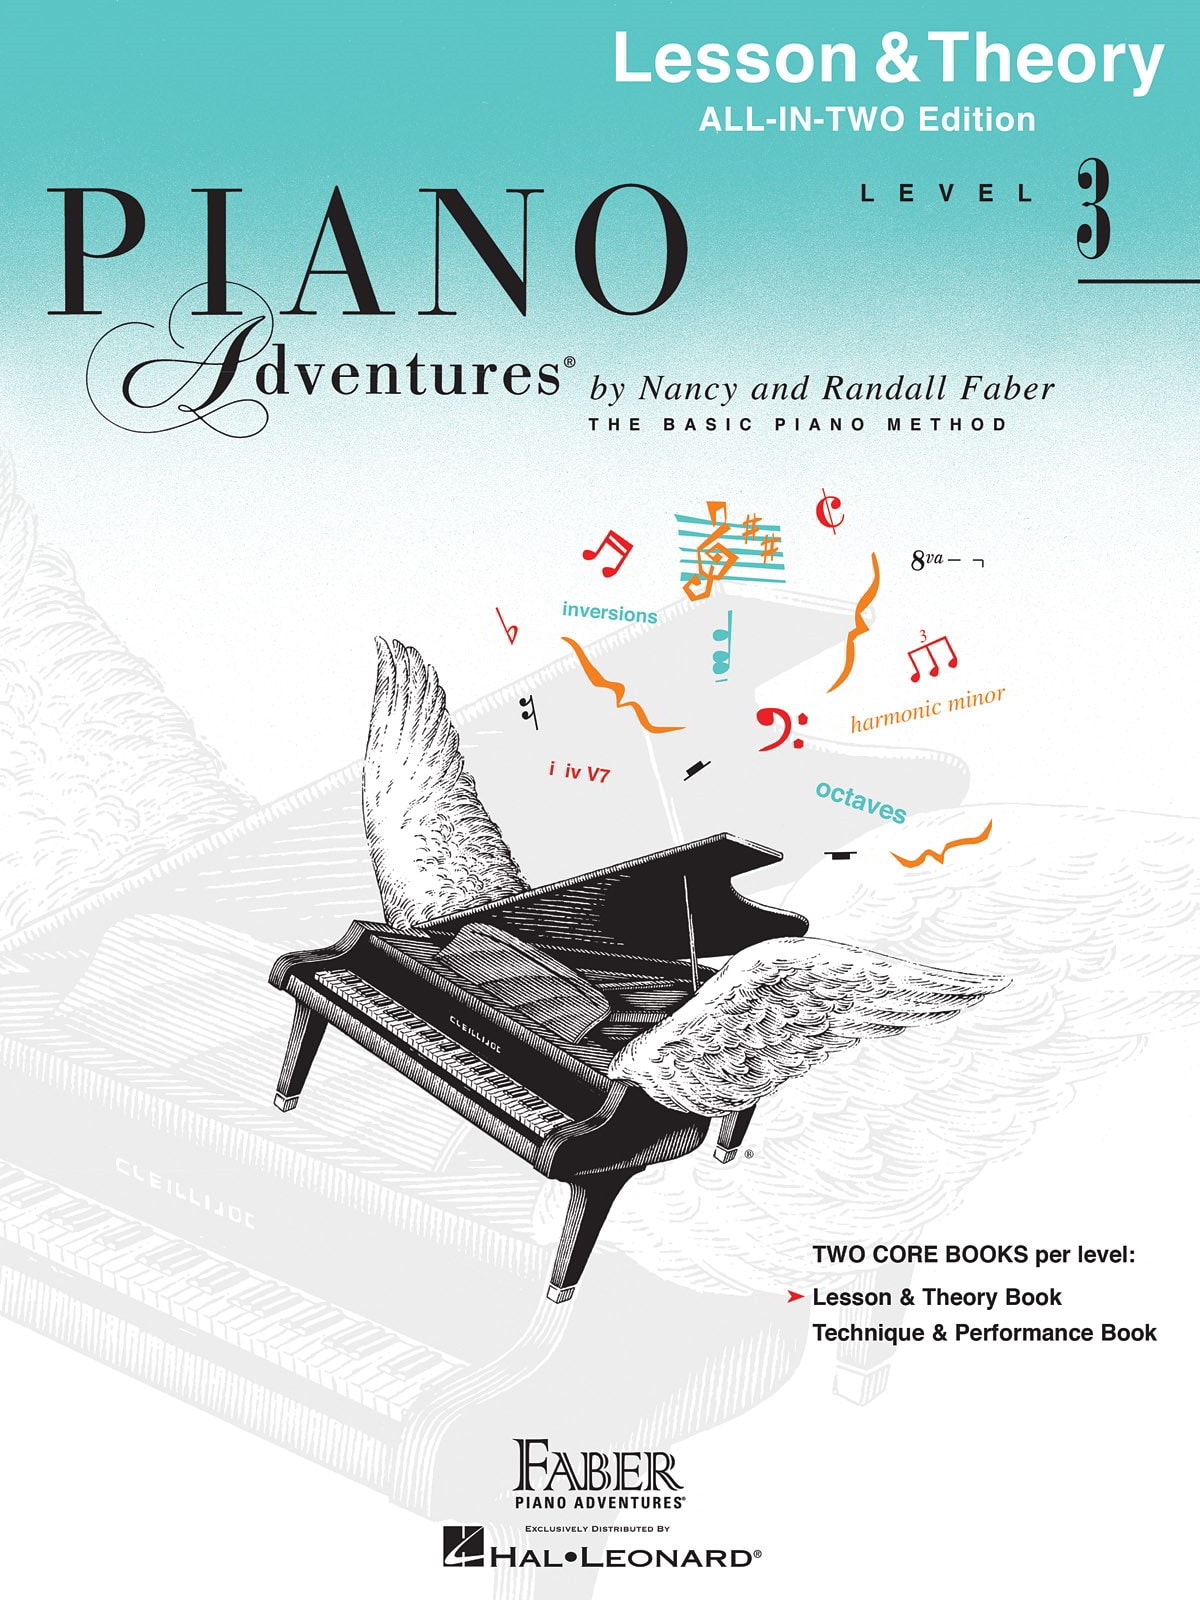 Piano Adventures All-In-Two: Lesson & Theory Level 3